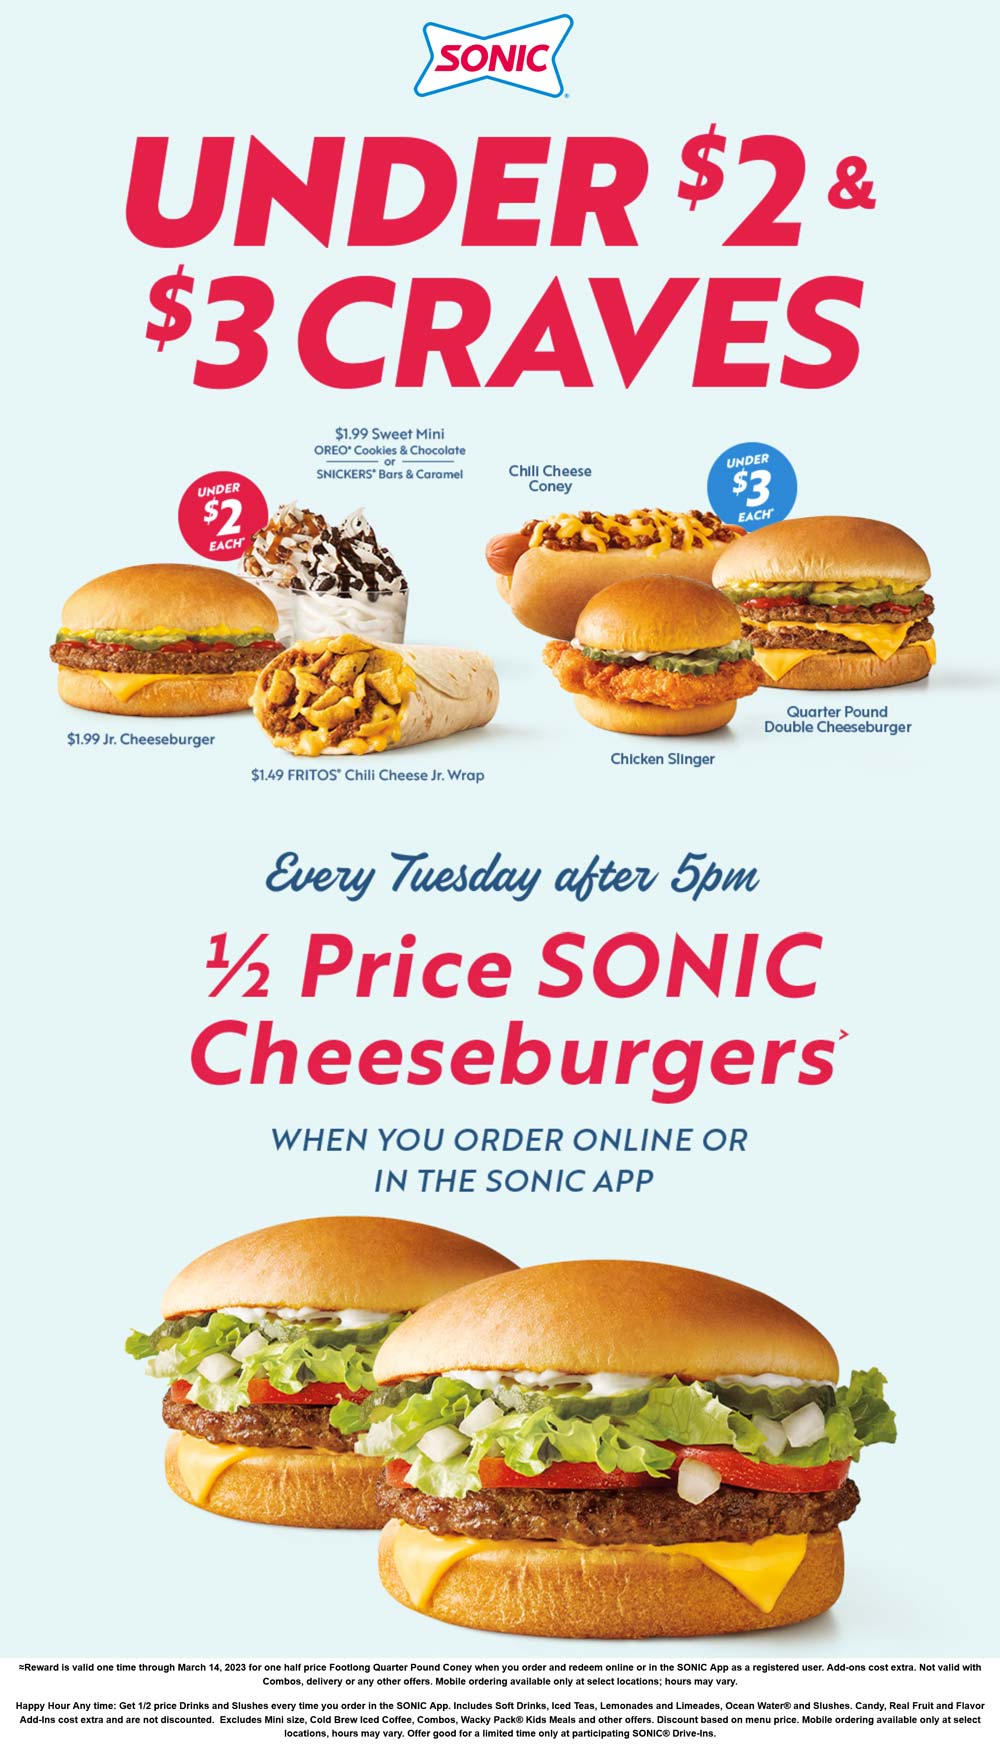 Sonic Drive-In restaurants Coupon  $2 cheeseburger & more at Sonic Drive-In #sonicdrivein 